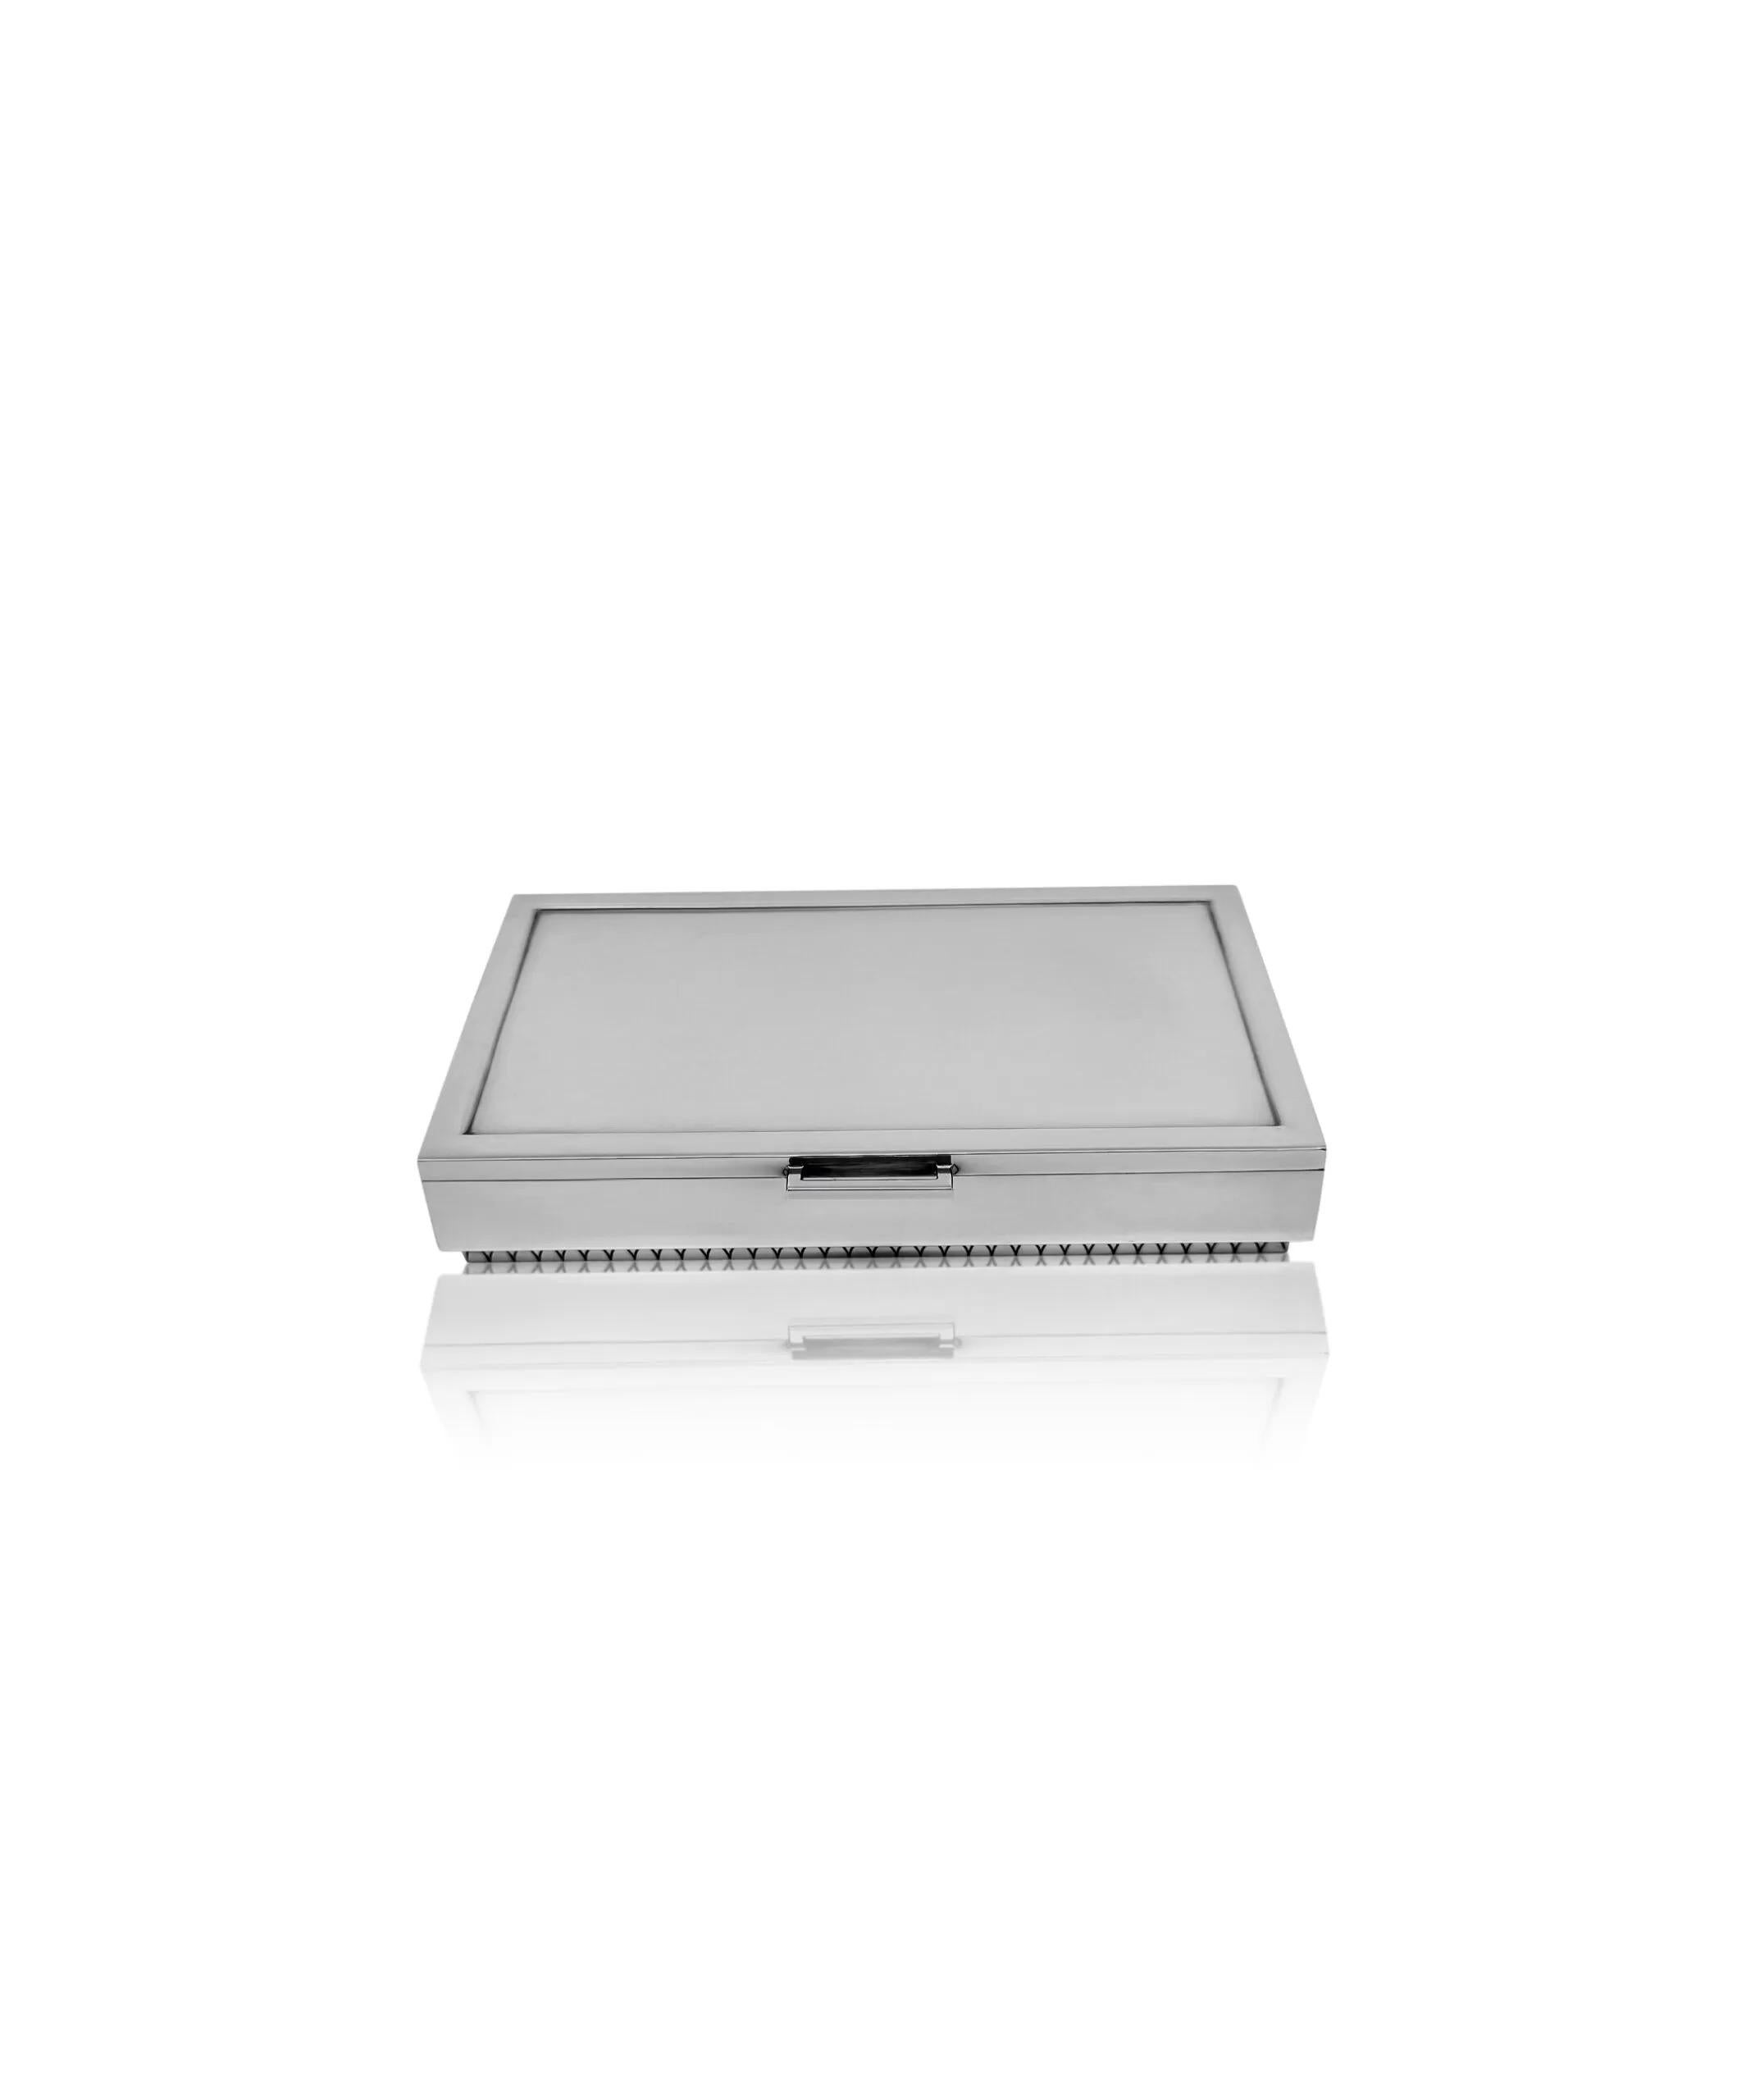 A vintage Georg Jensen Art Deco box crafted from early sterling silver, featuring design #825 by Sigvard Bernadotte dating back to 1938. The robust rectangular box is expertly hand-chased along its edges with an intricate art deco pattern. The lid